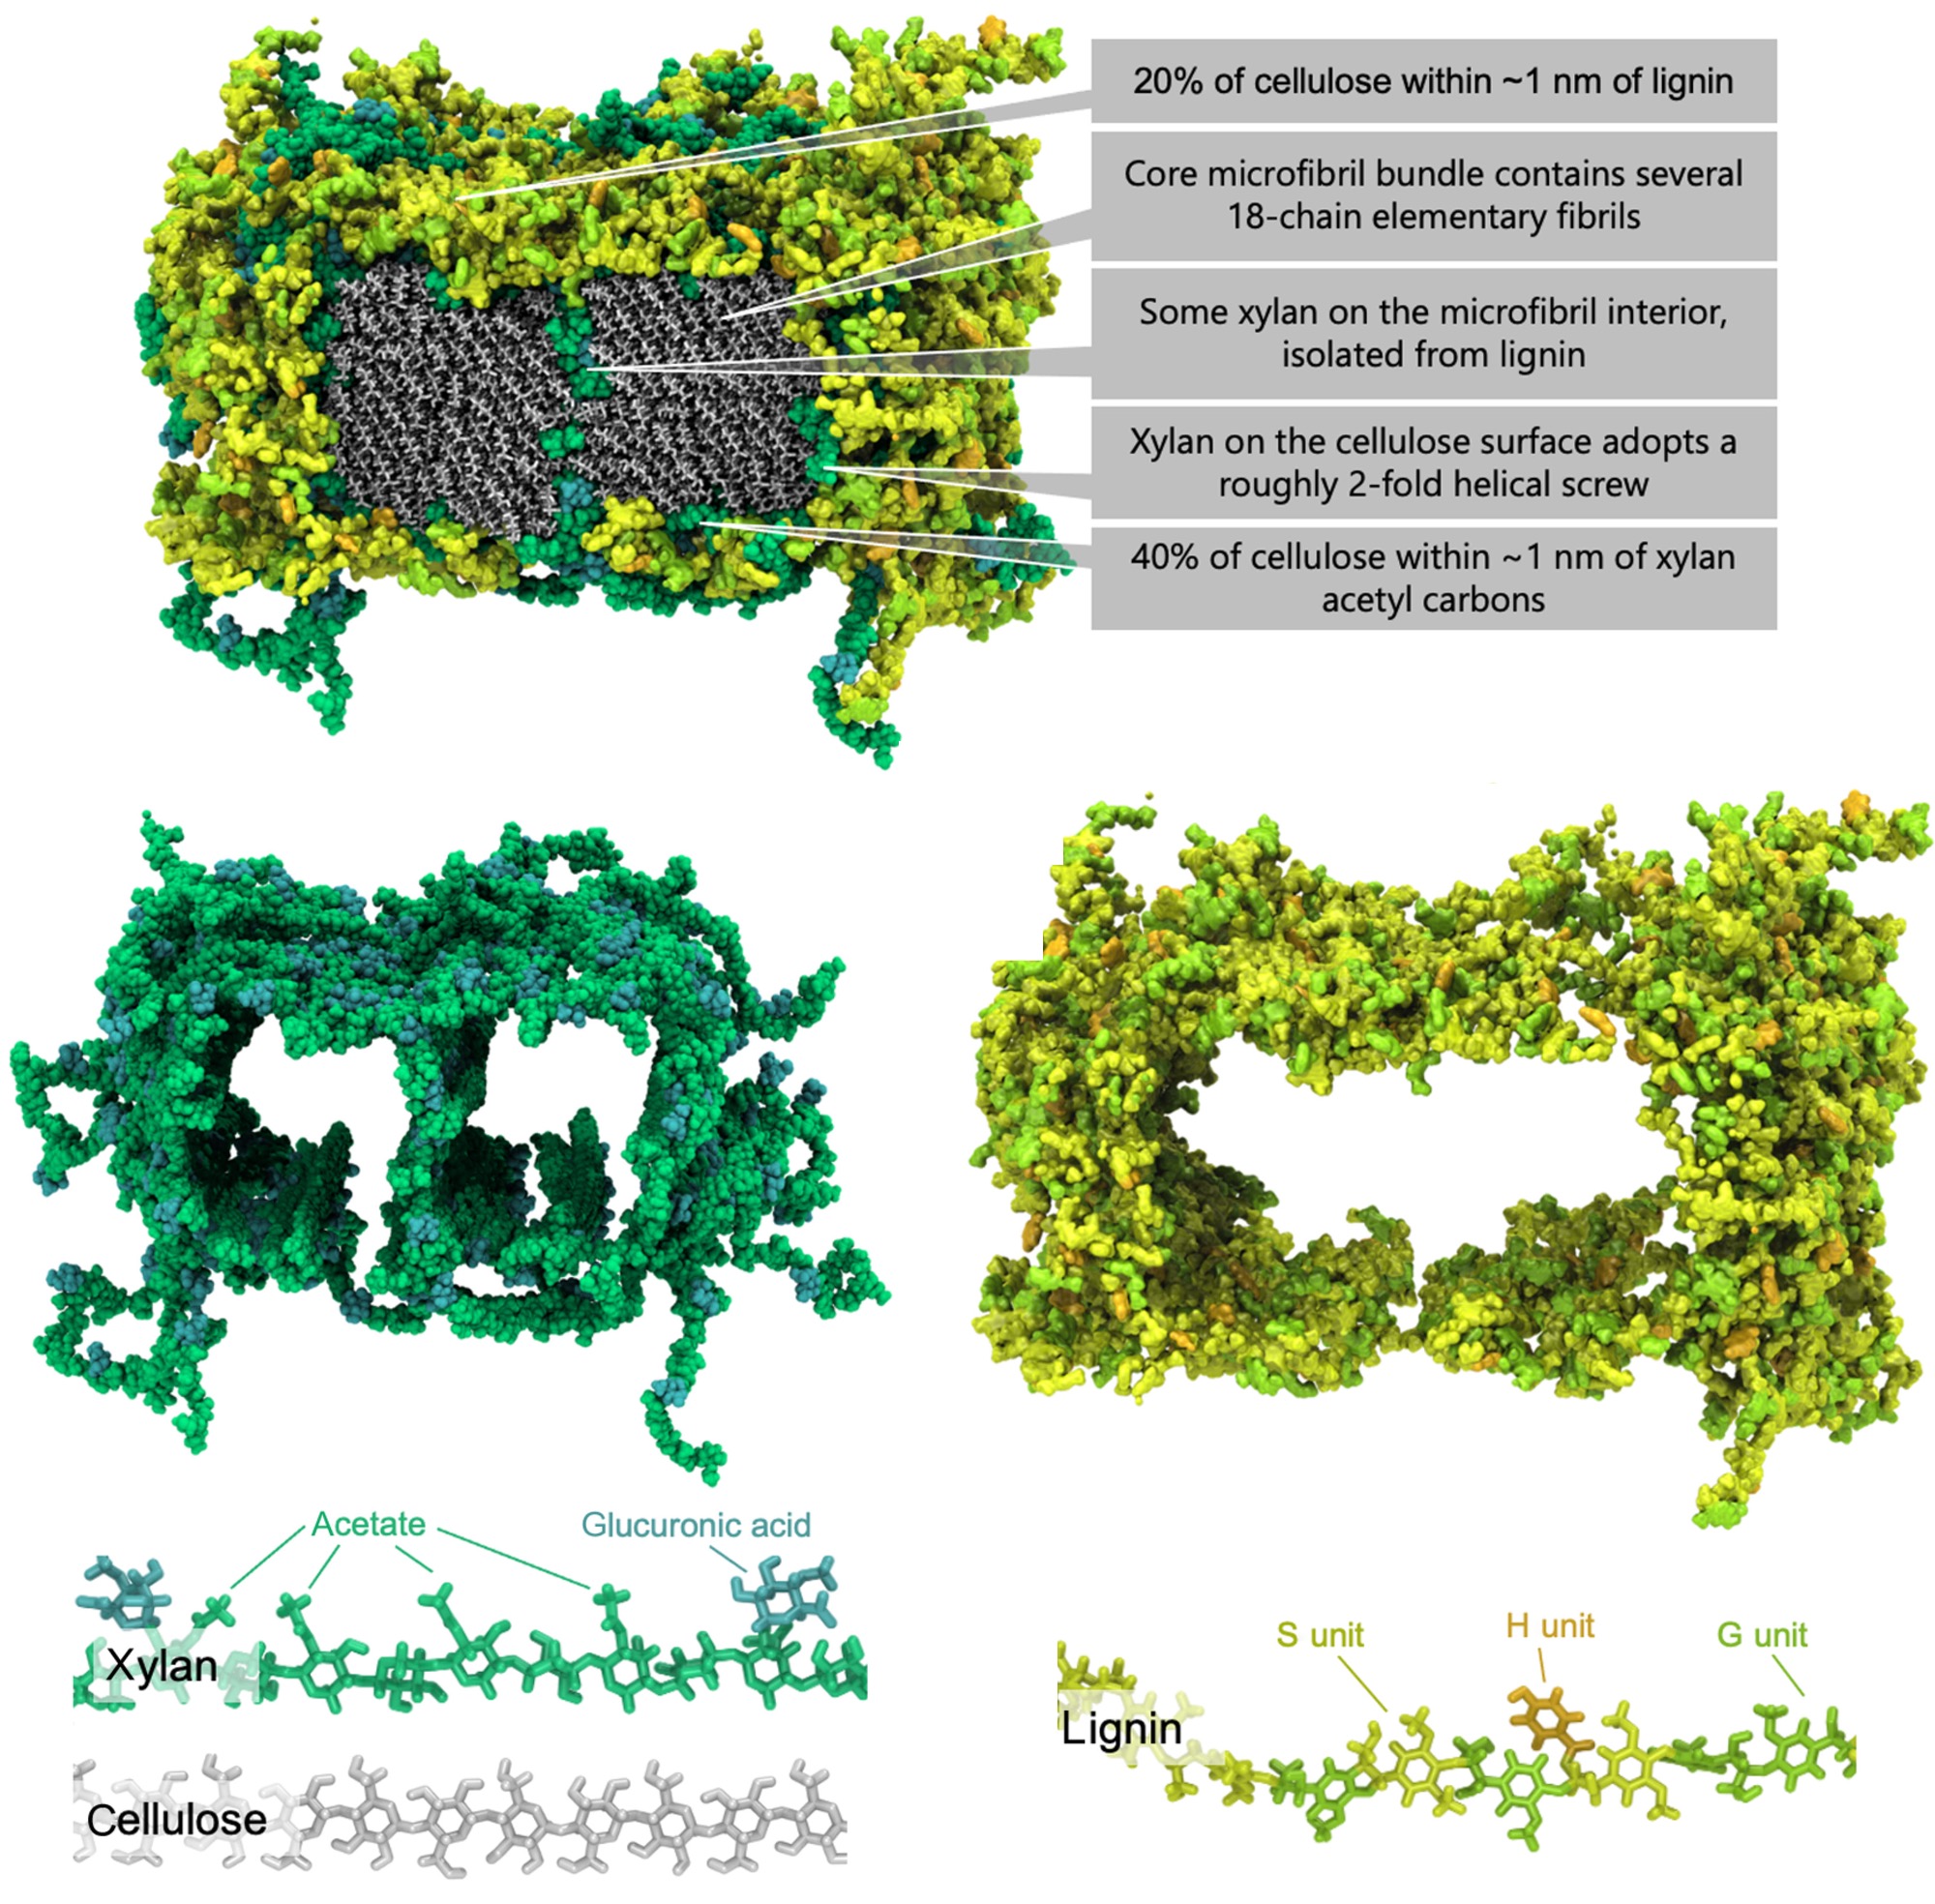 Atomistic, macromolecular model of the Populus secondary cell wall informed by solid-state NMR